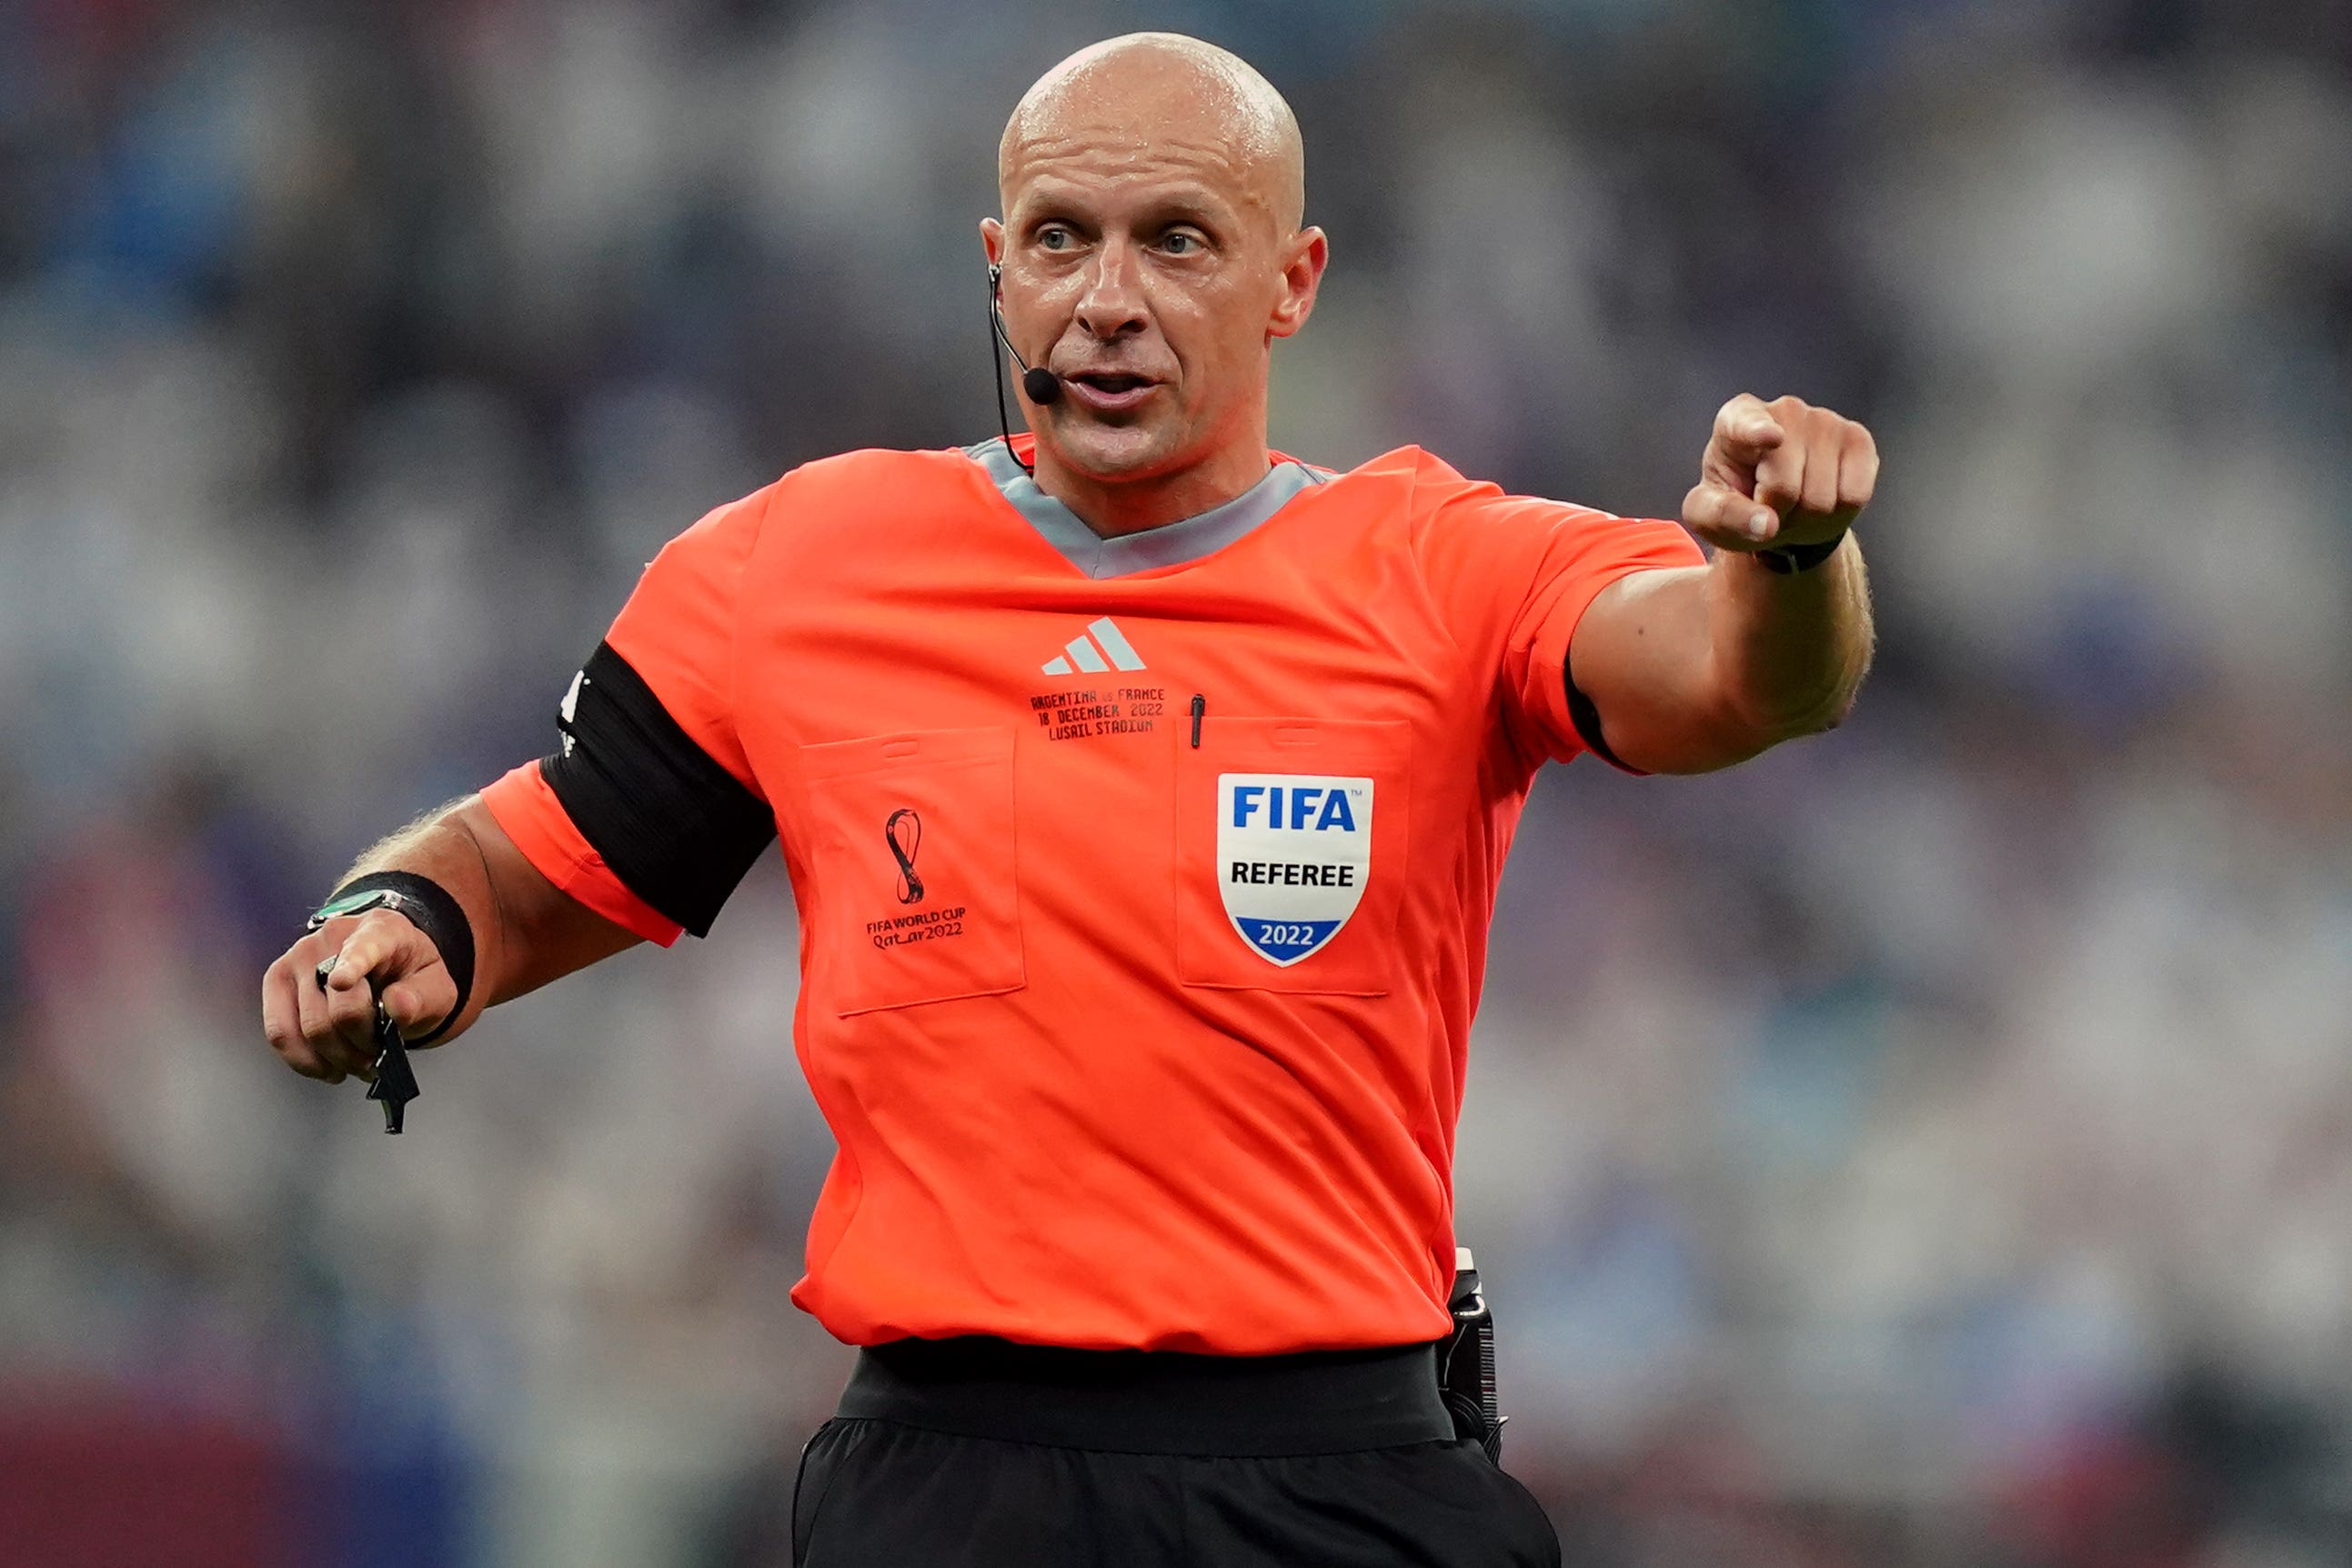 Referee Szymon Marciniak, a former amateur player, was praised for his performance in Sunday’s World Cup final (Mike Egerton/PA)